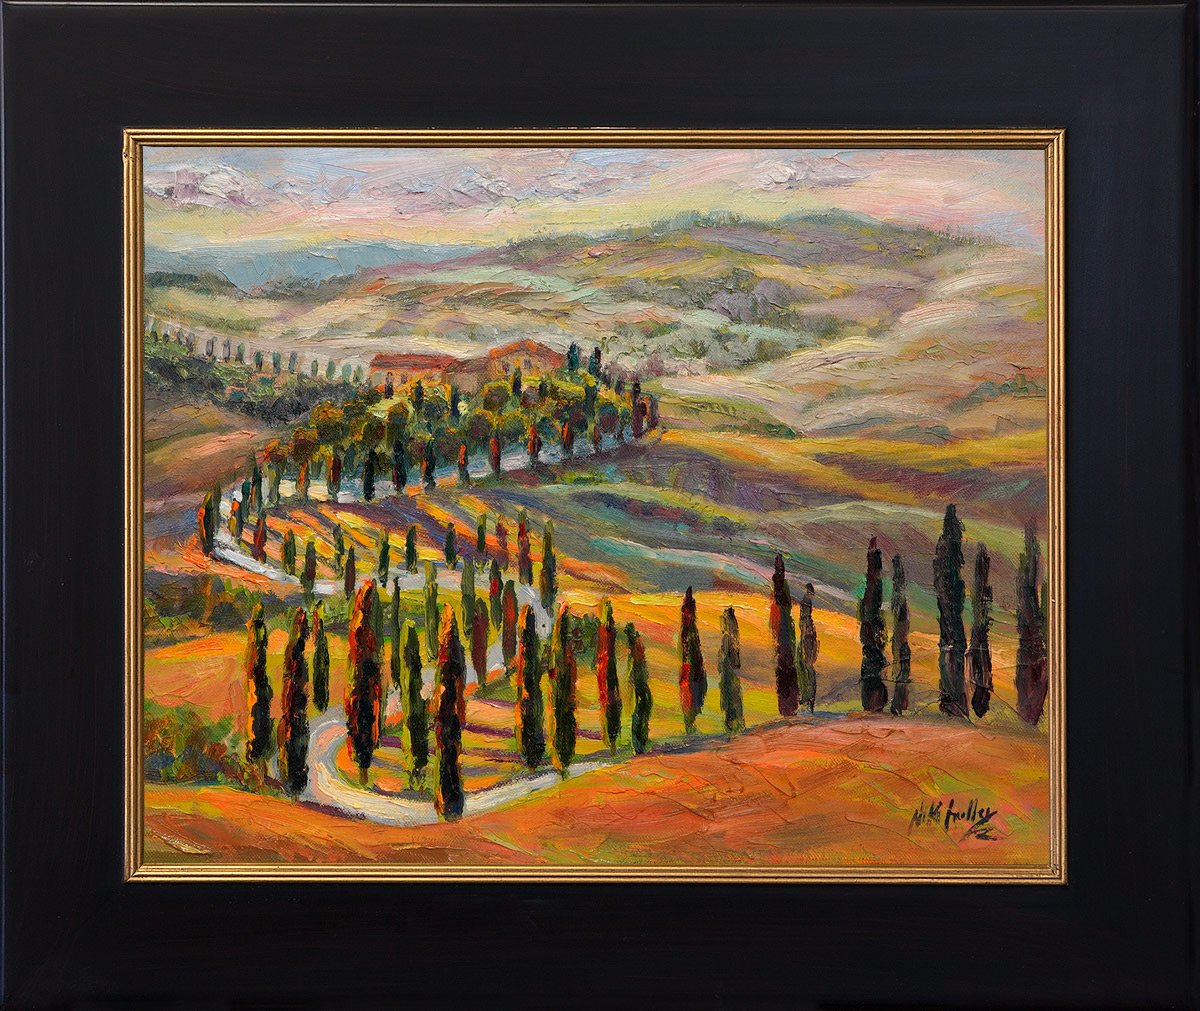 Italy, contemporary impressionist, dallas texas artist, travel art, Niki Gulley paintings